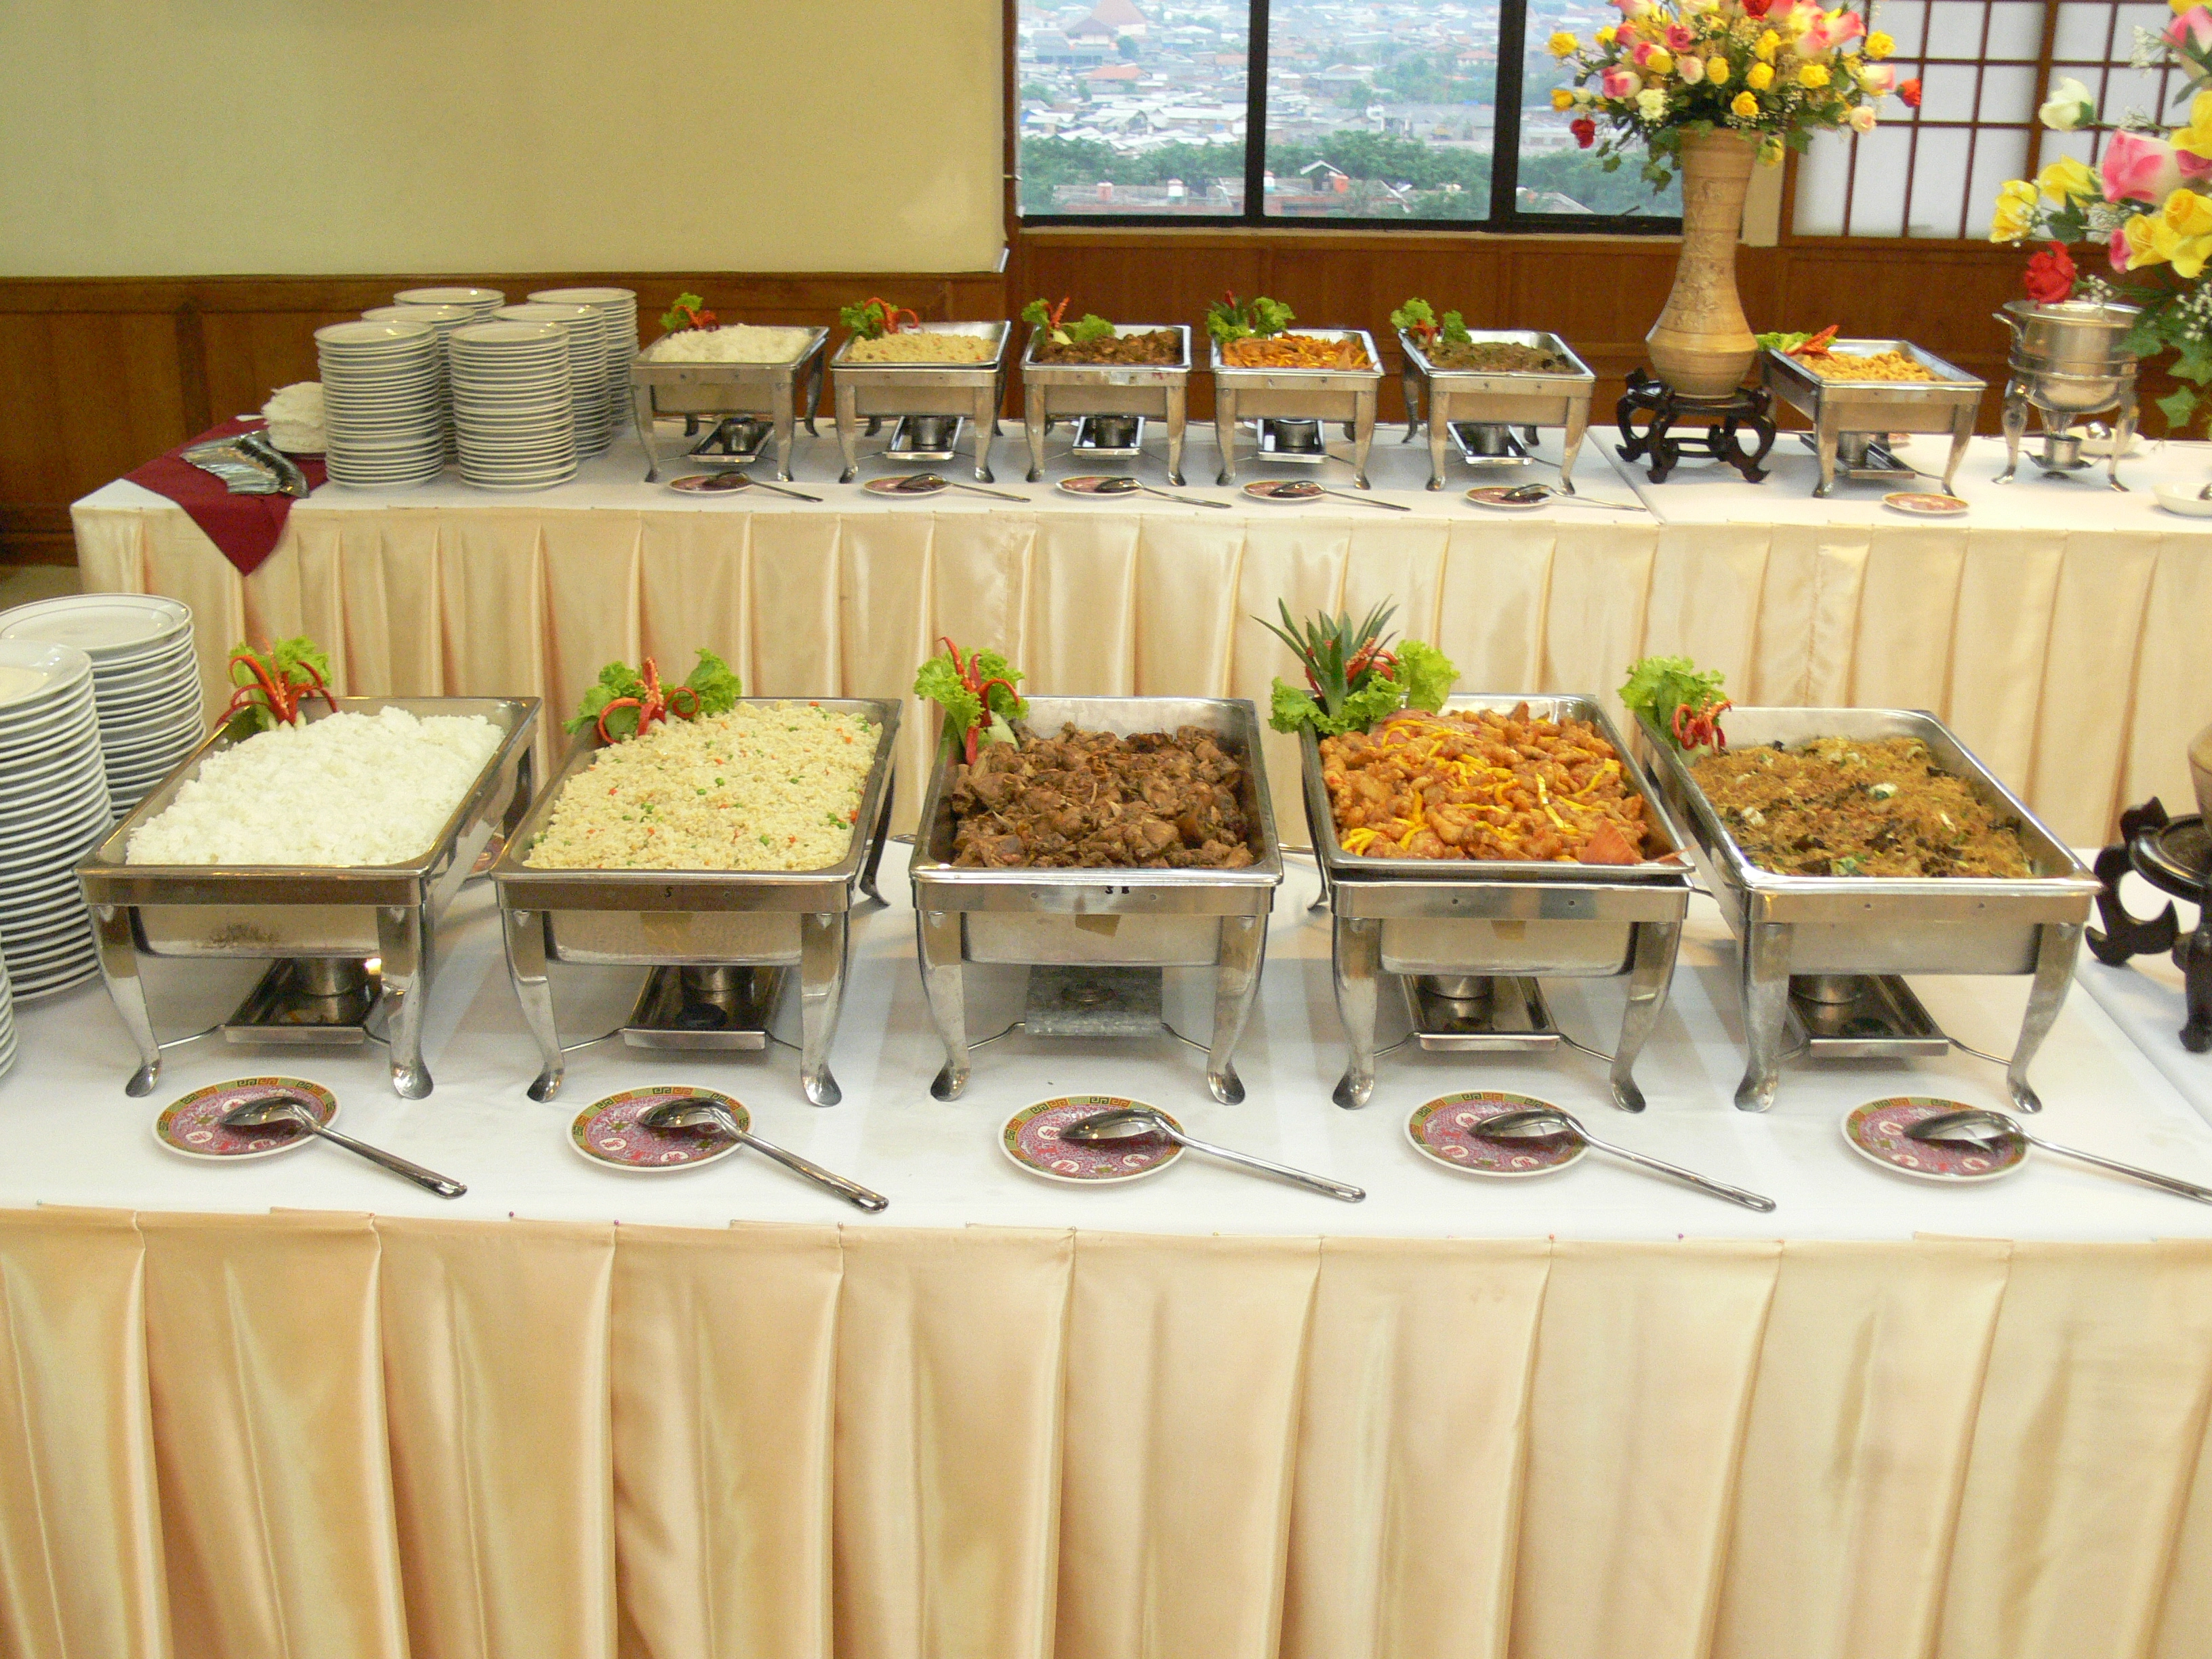 Al-Nab‘a-Top industrial catering services and supplies in oman